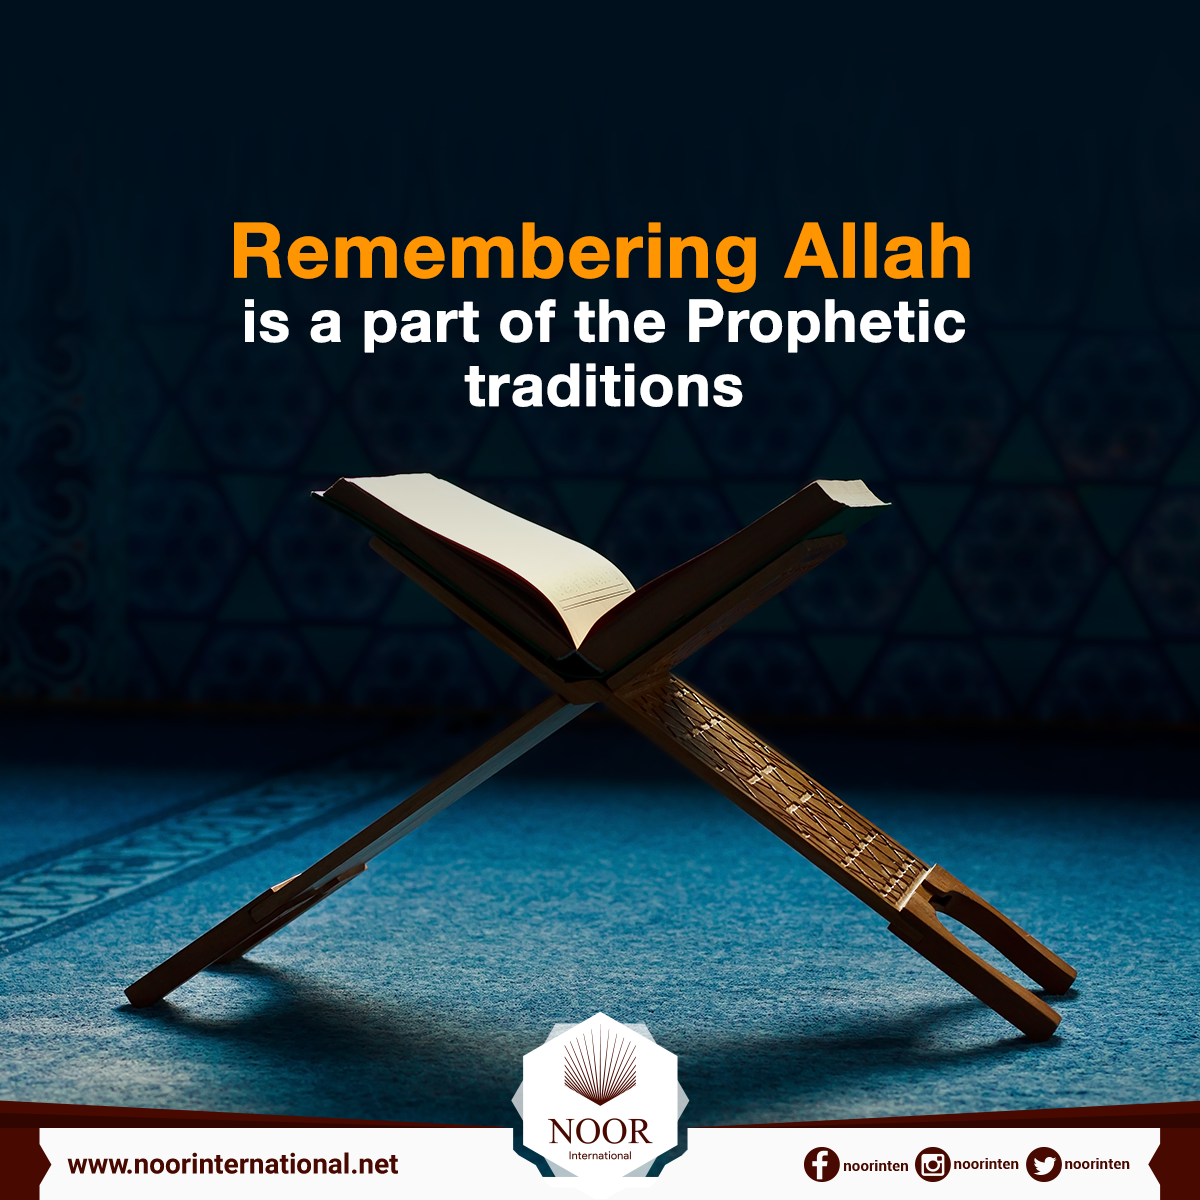 Remembering Allah is a part of the Prophetic traditions